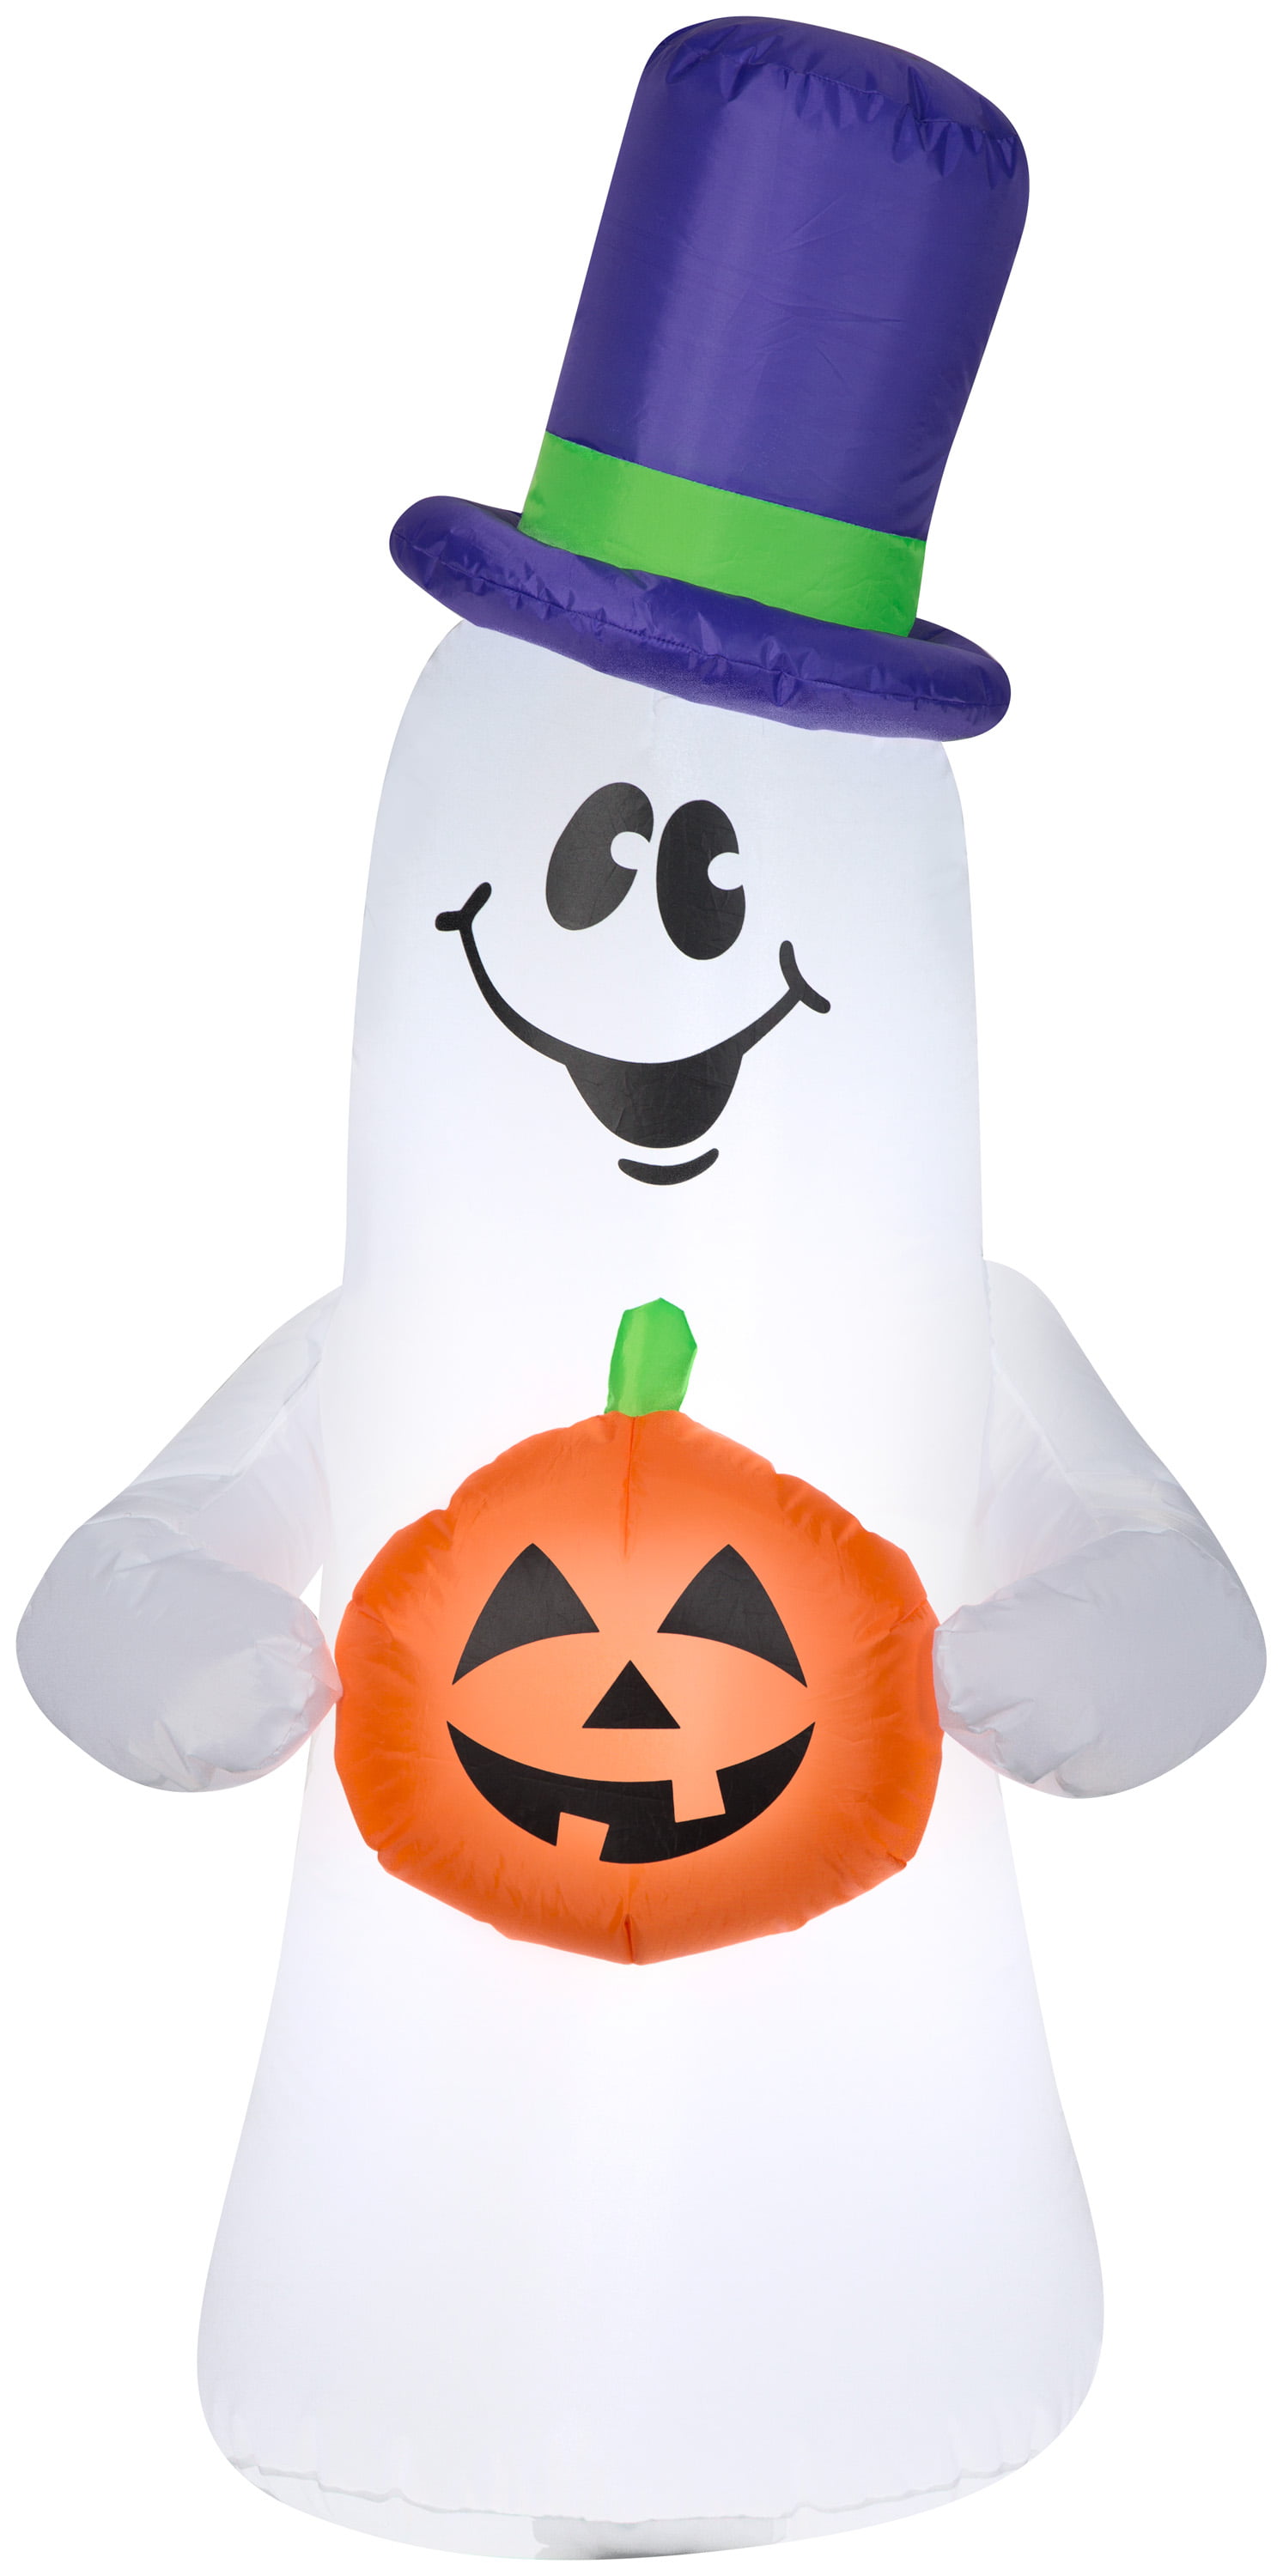 Airblown Inflatable Ghost with Top Hat 4ft tall - Walmart.com